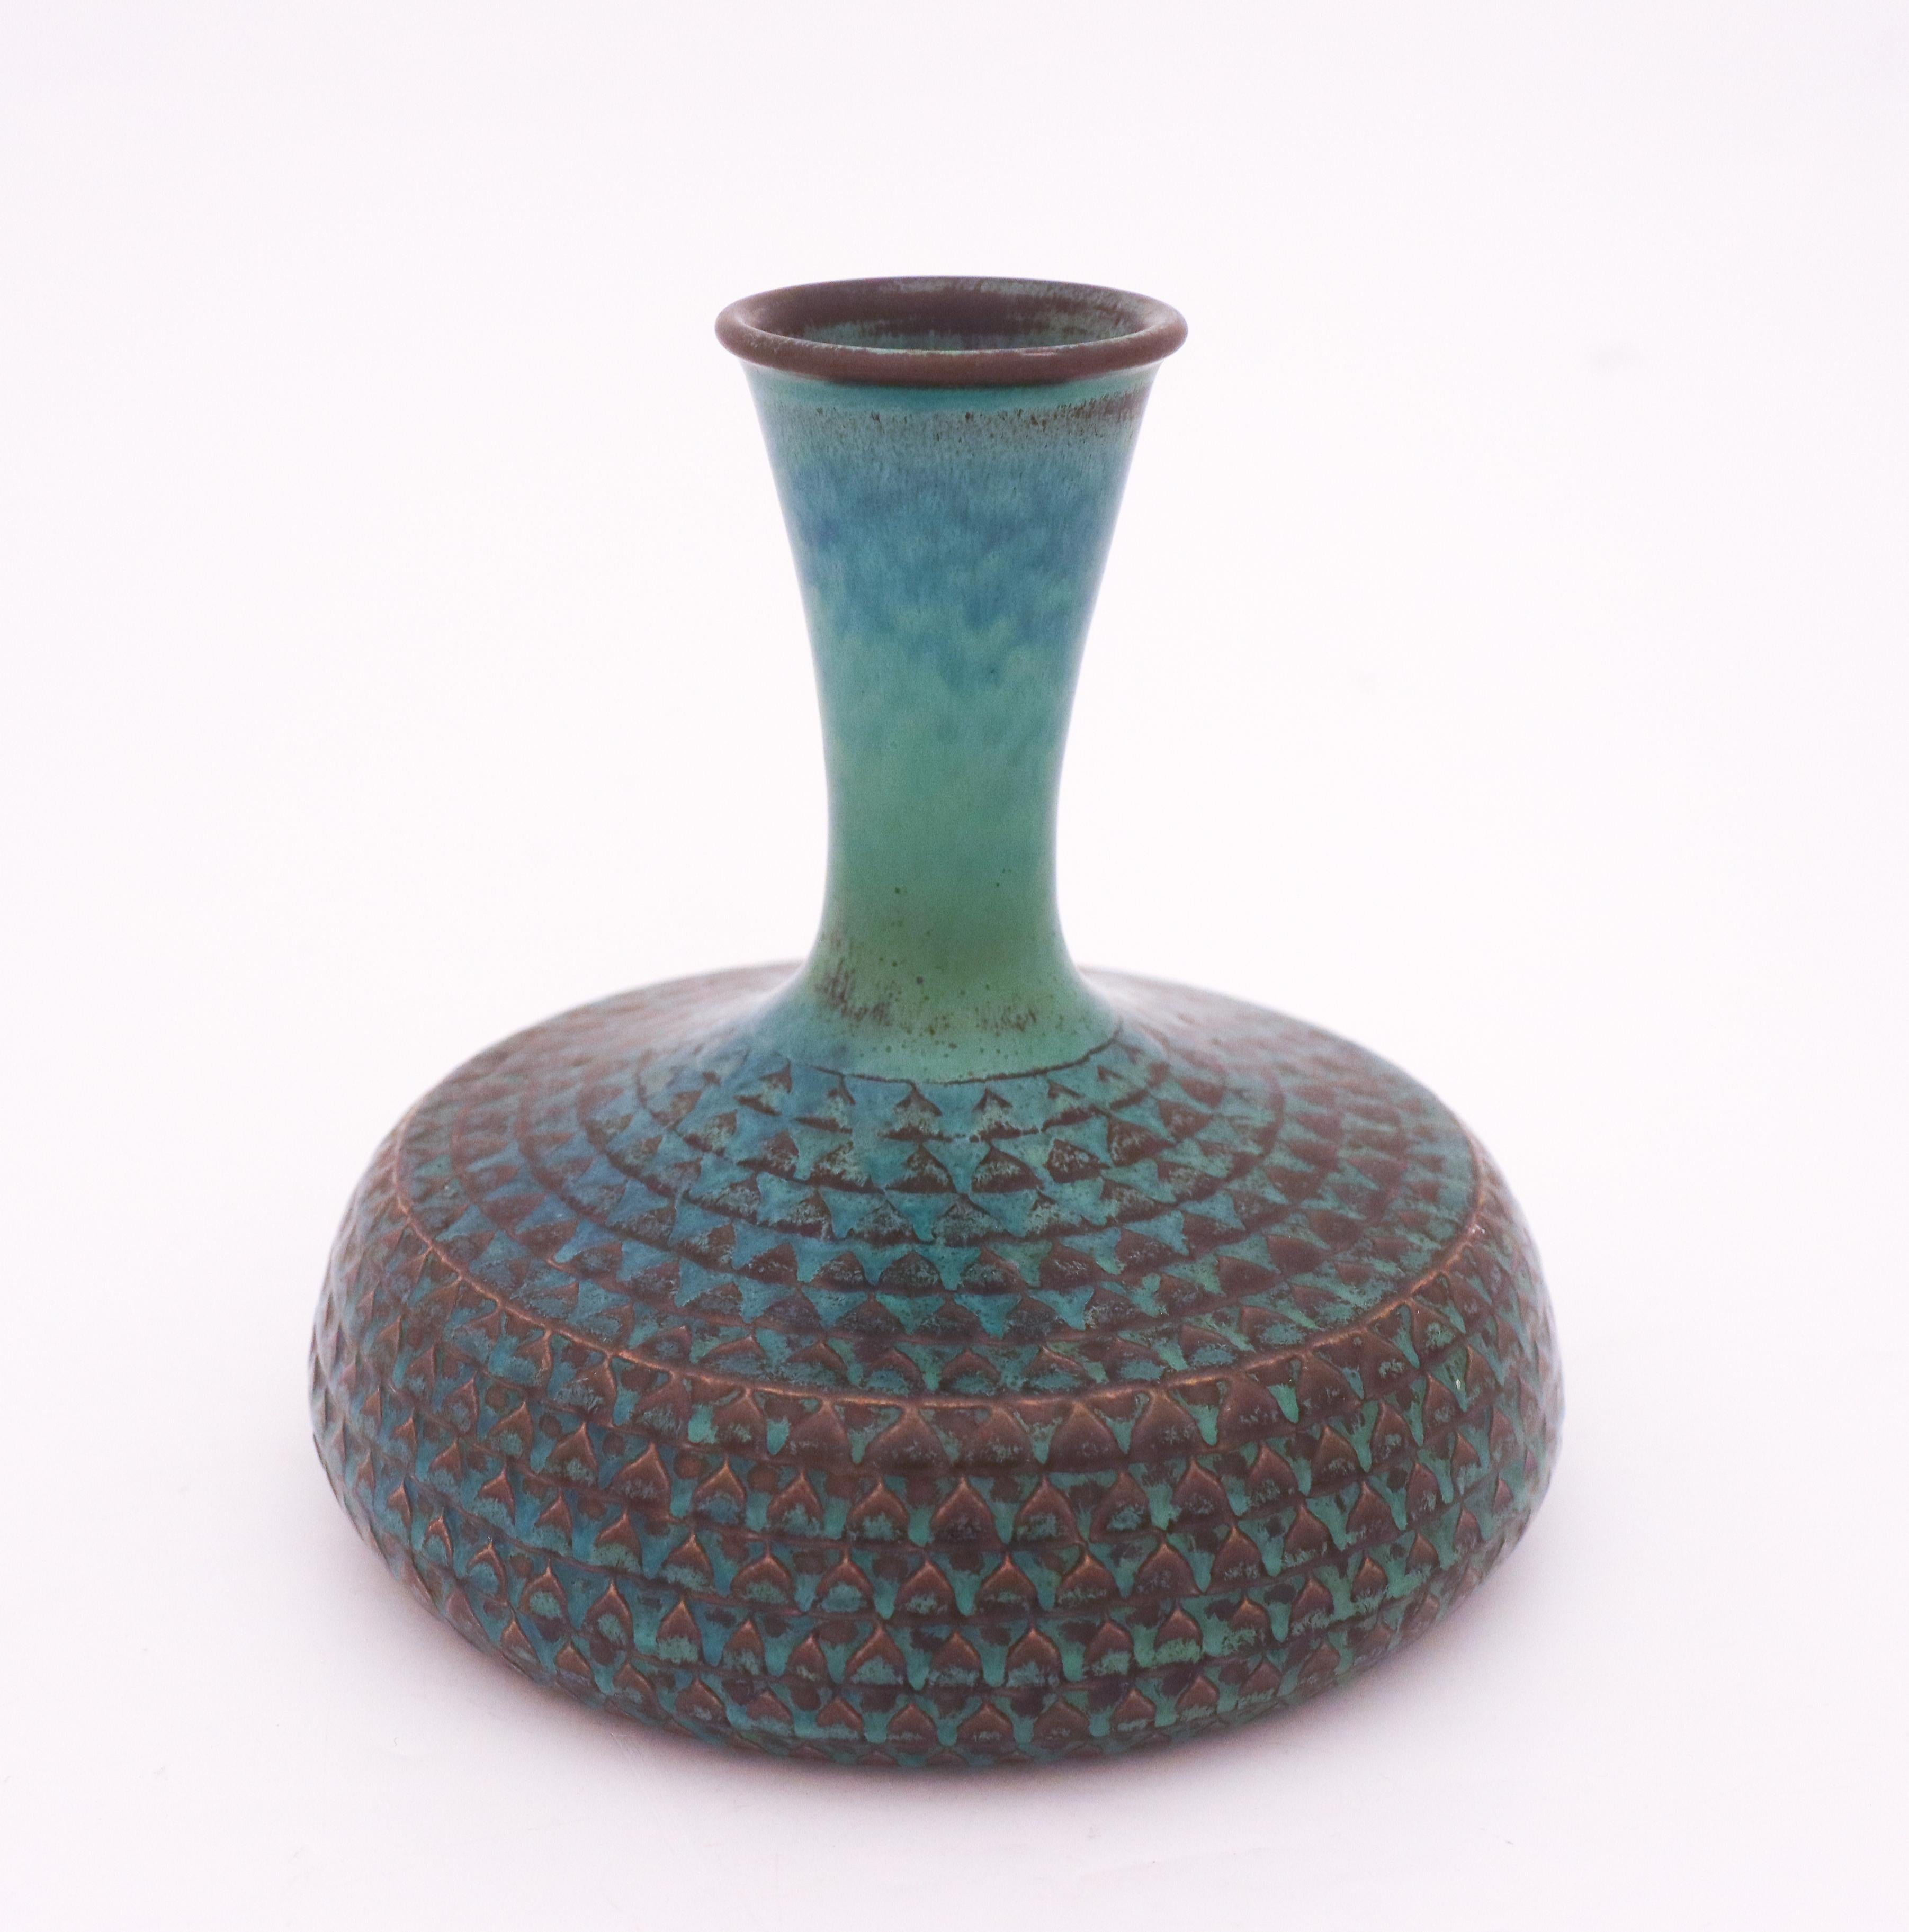 A lovely vase designed by Stig Lindberg at Gustavsberg. It is 16,5 cm high and 17 cm in diameter and have a lovely glaze. It is in mint condition.